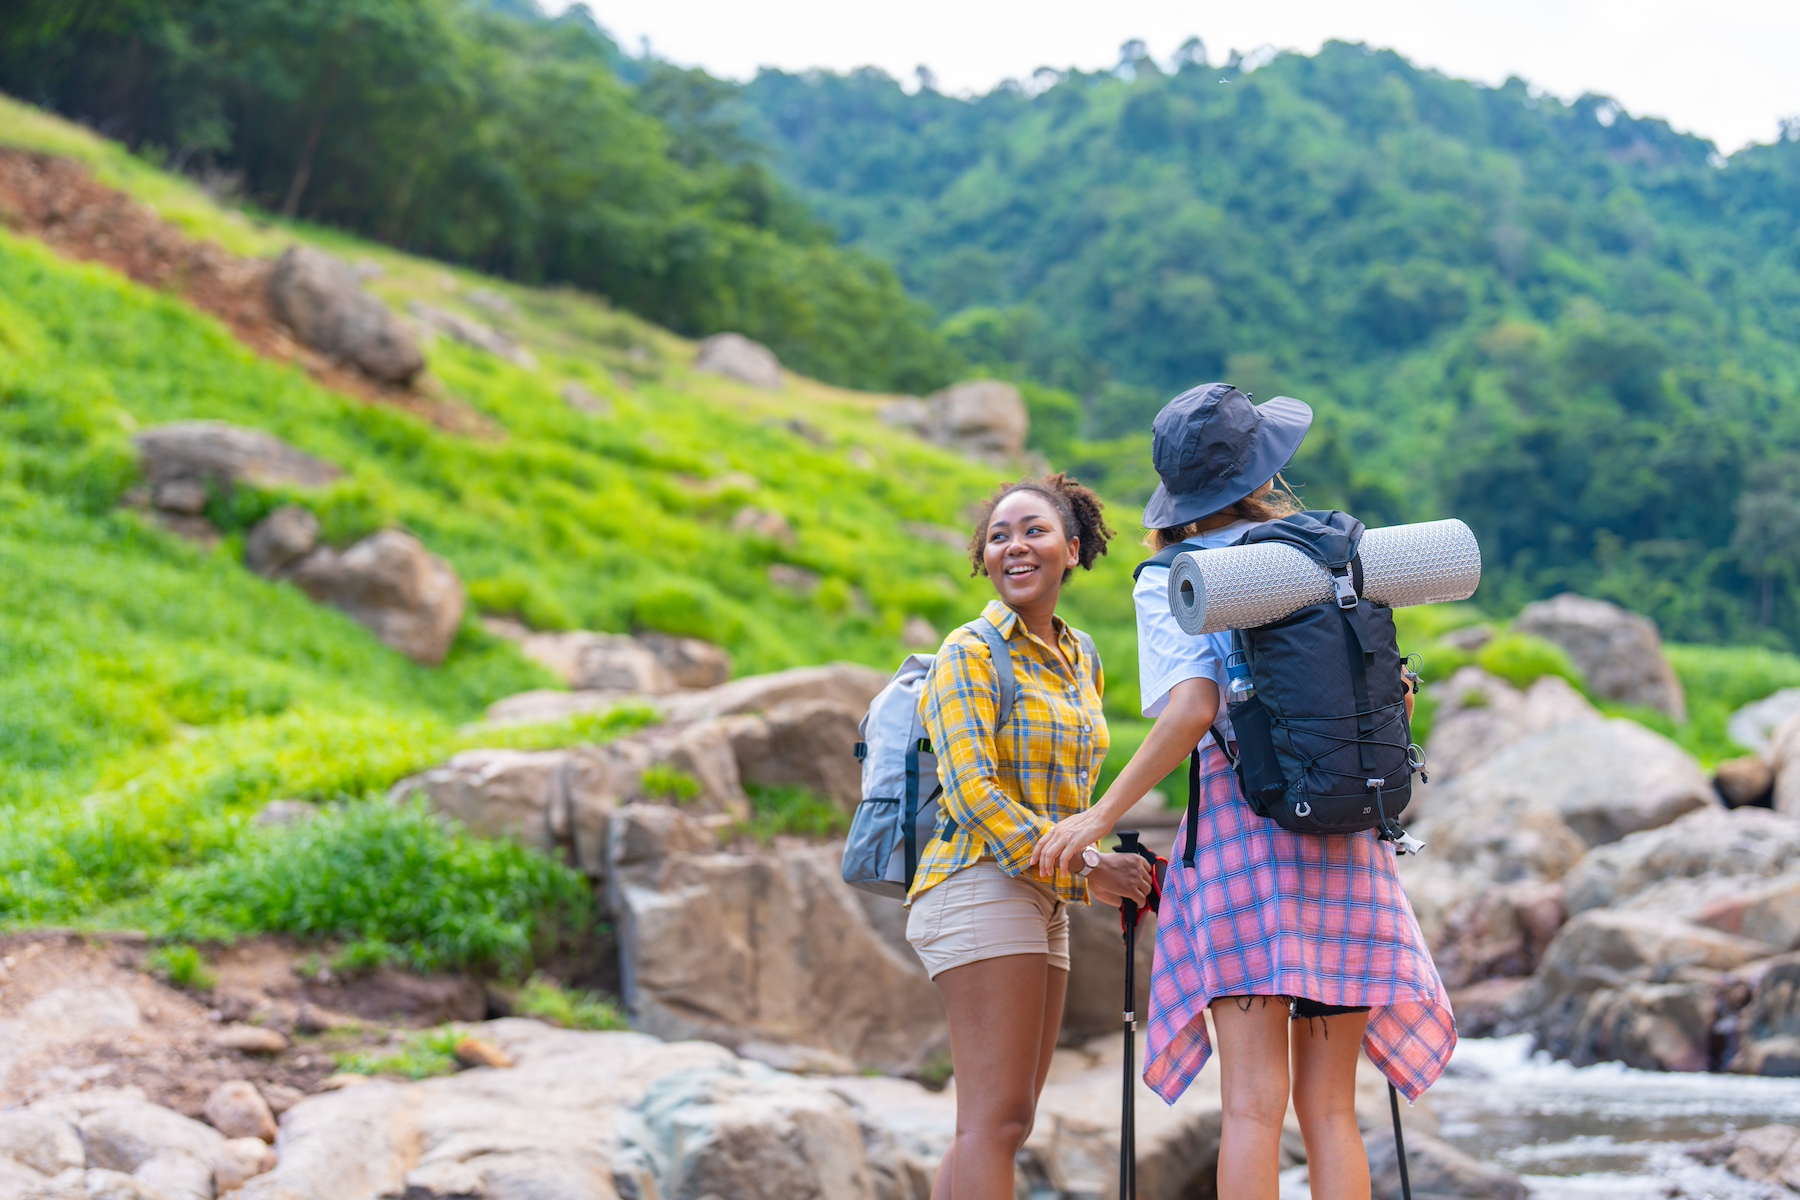 Two women are on a hiking date in a beautiful rural part of Thailand